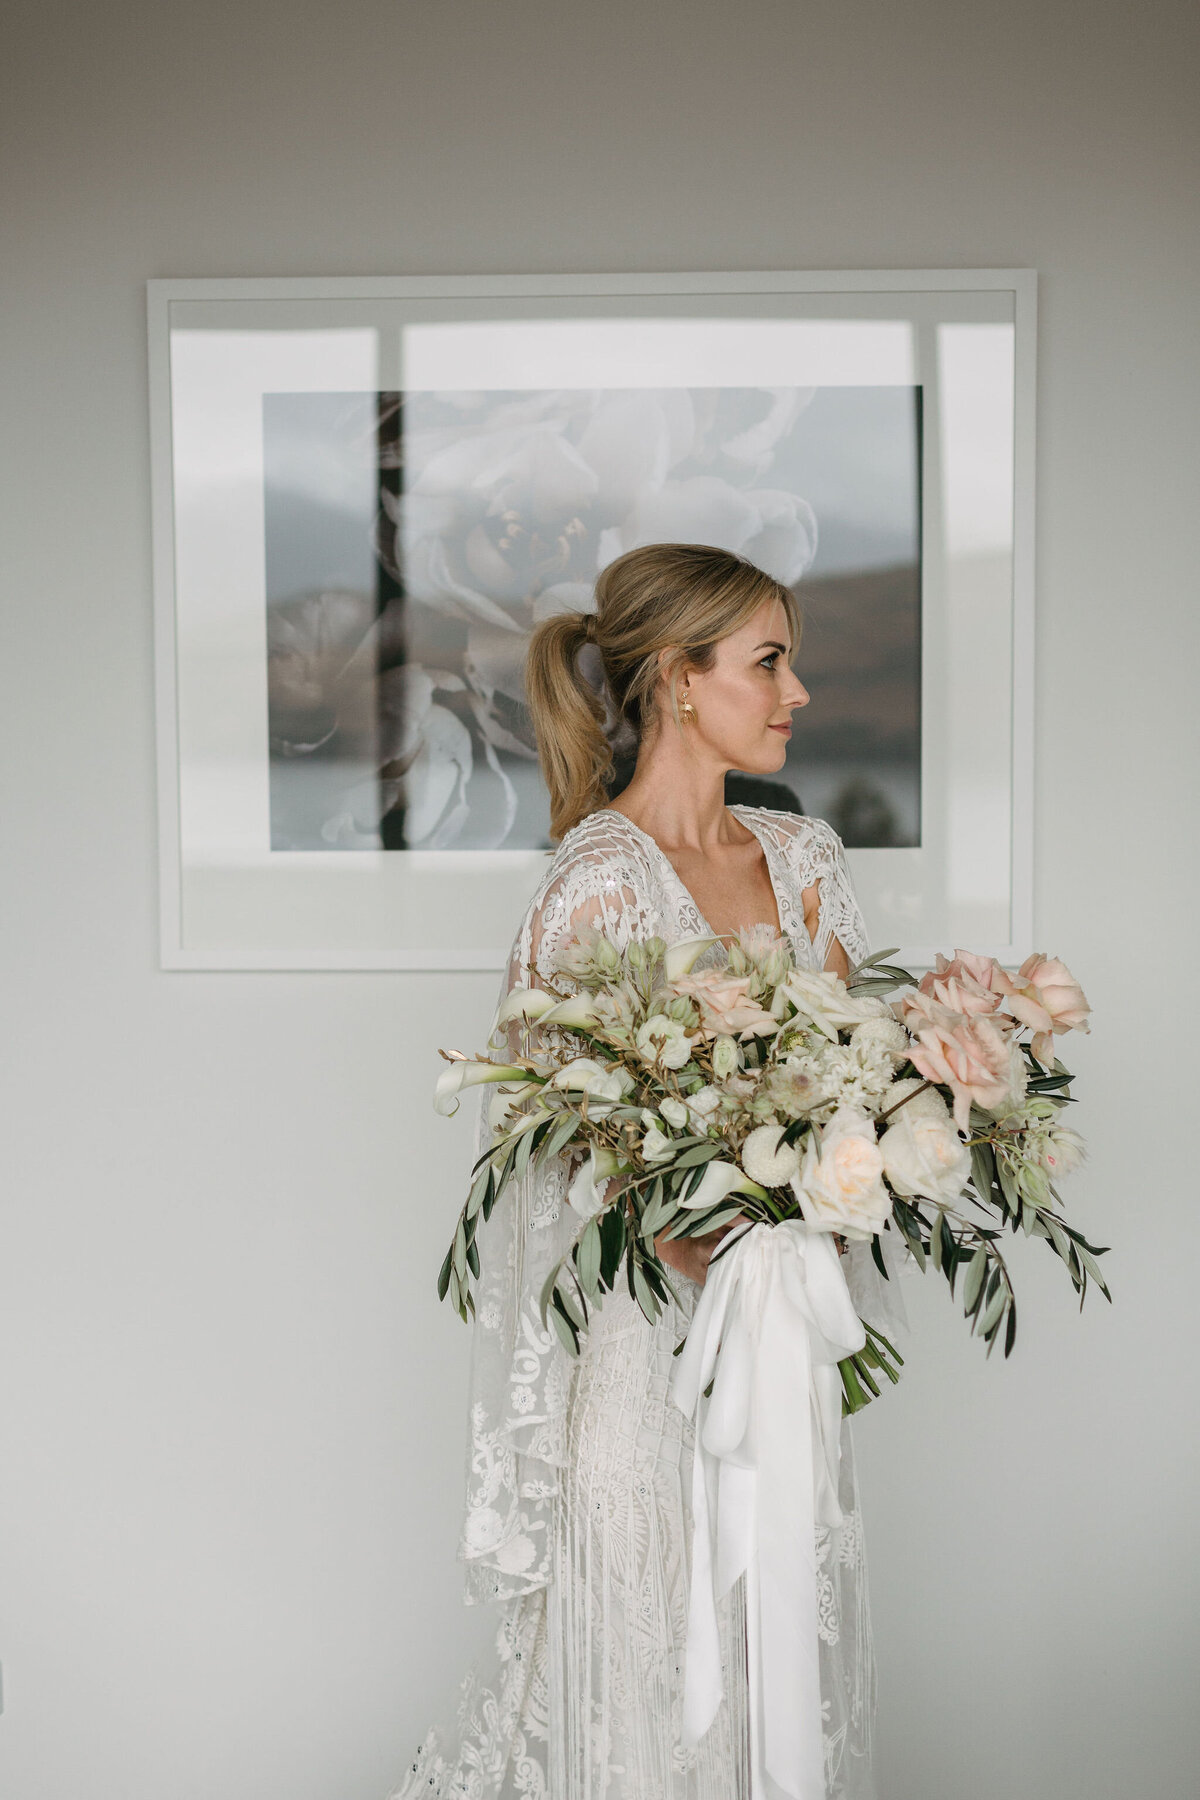 The Vase Floral Co - bride holds stunning large bouquet